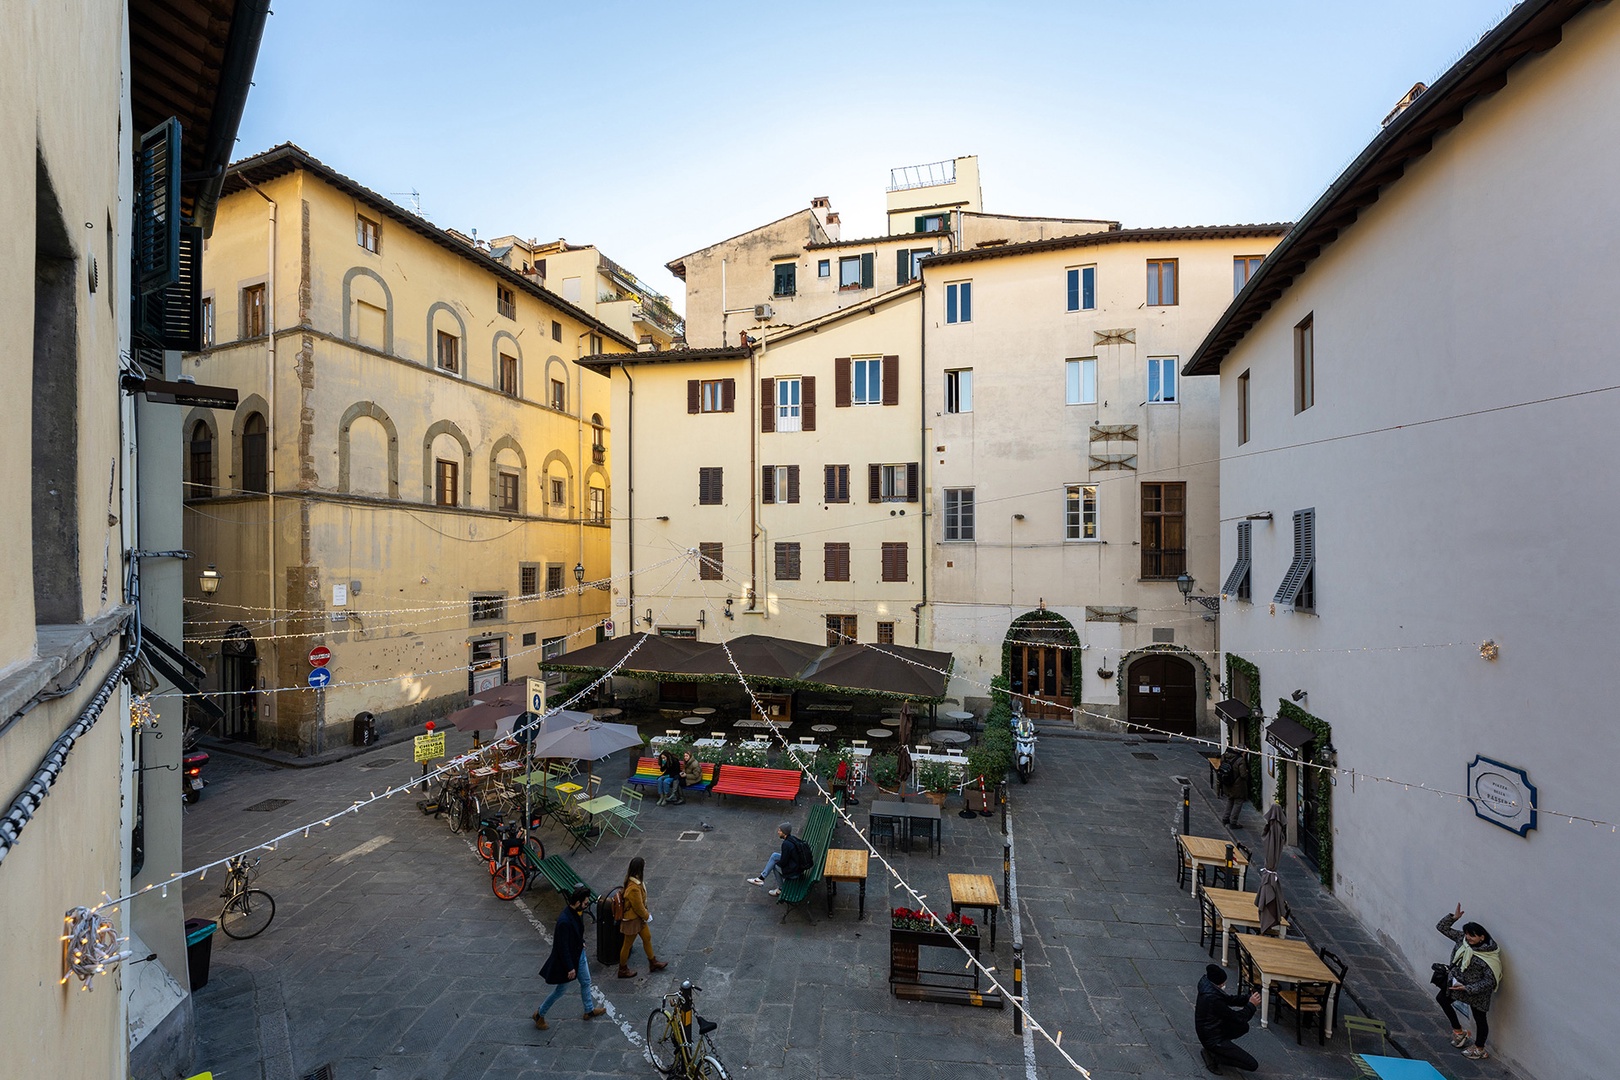 Lean out the window and look down the street towards the cafe's and restaurants in nearby Piazza della Passera.